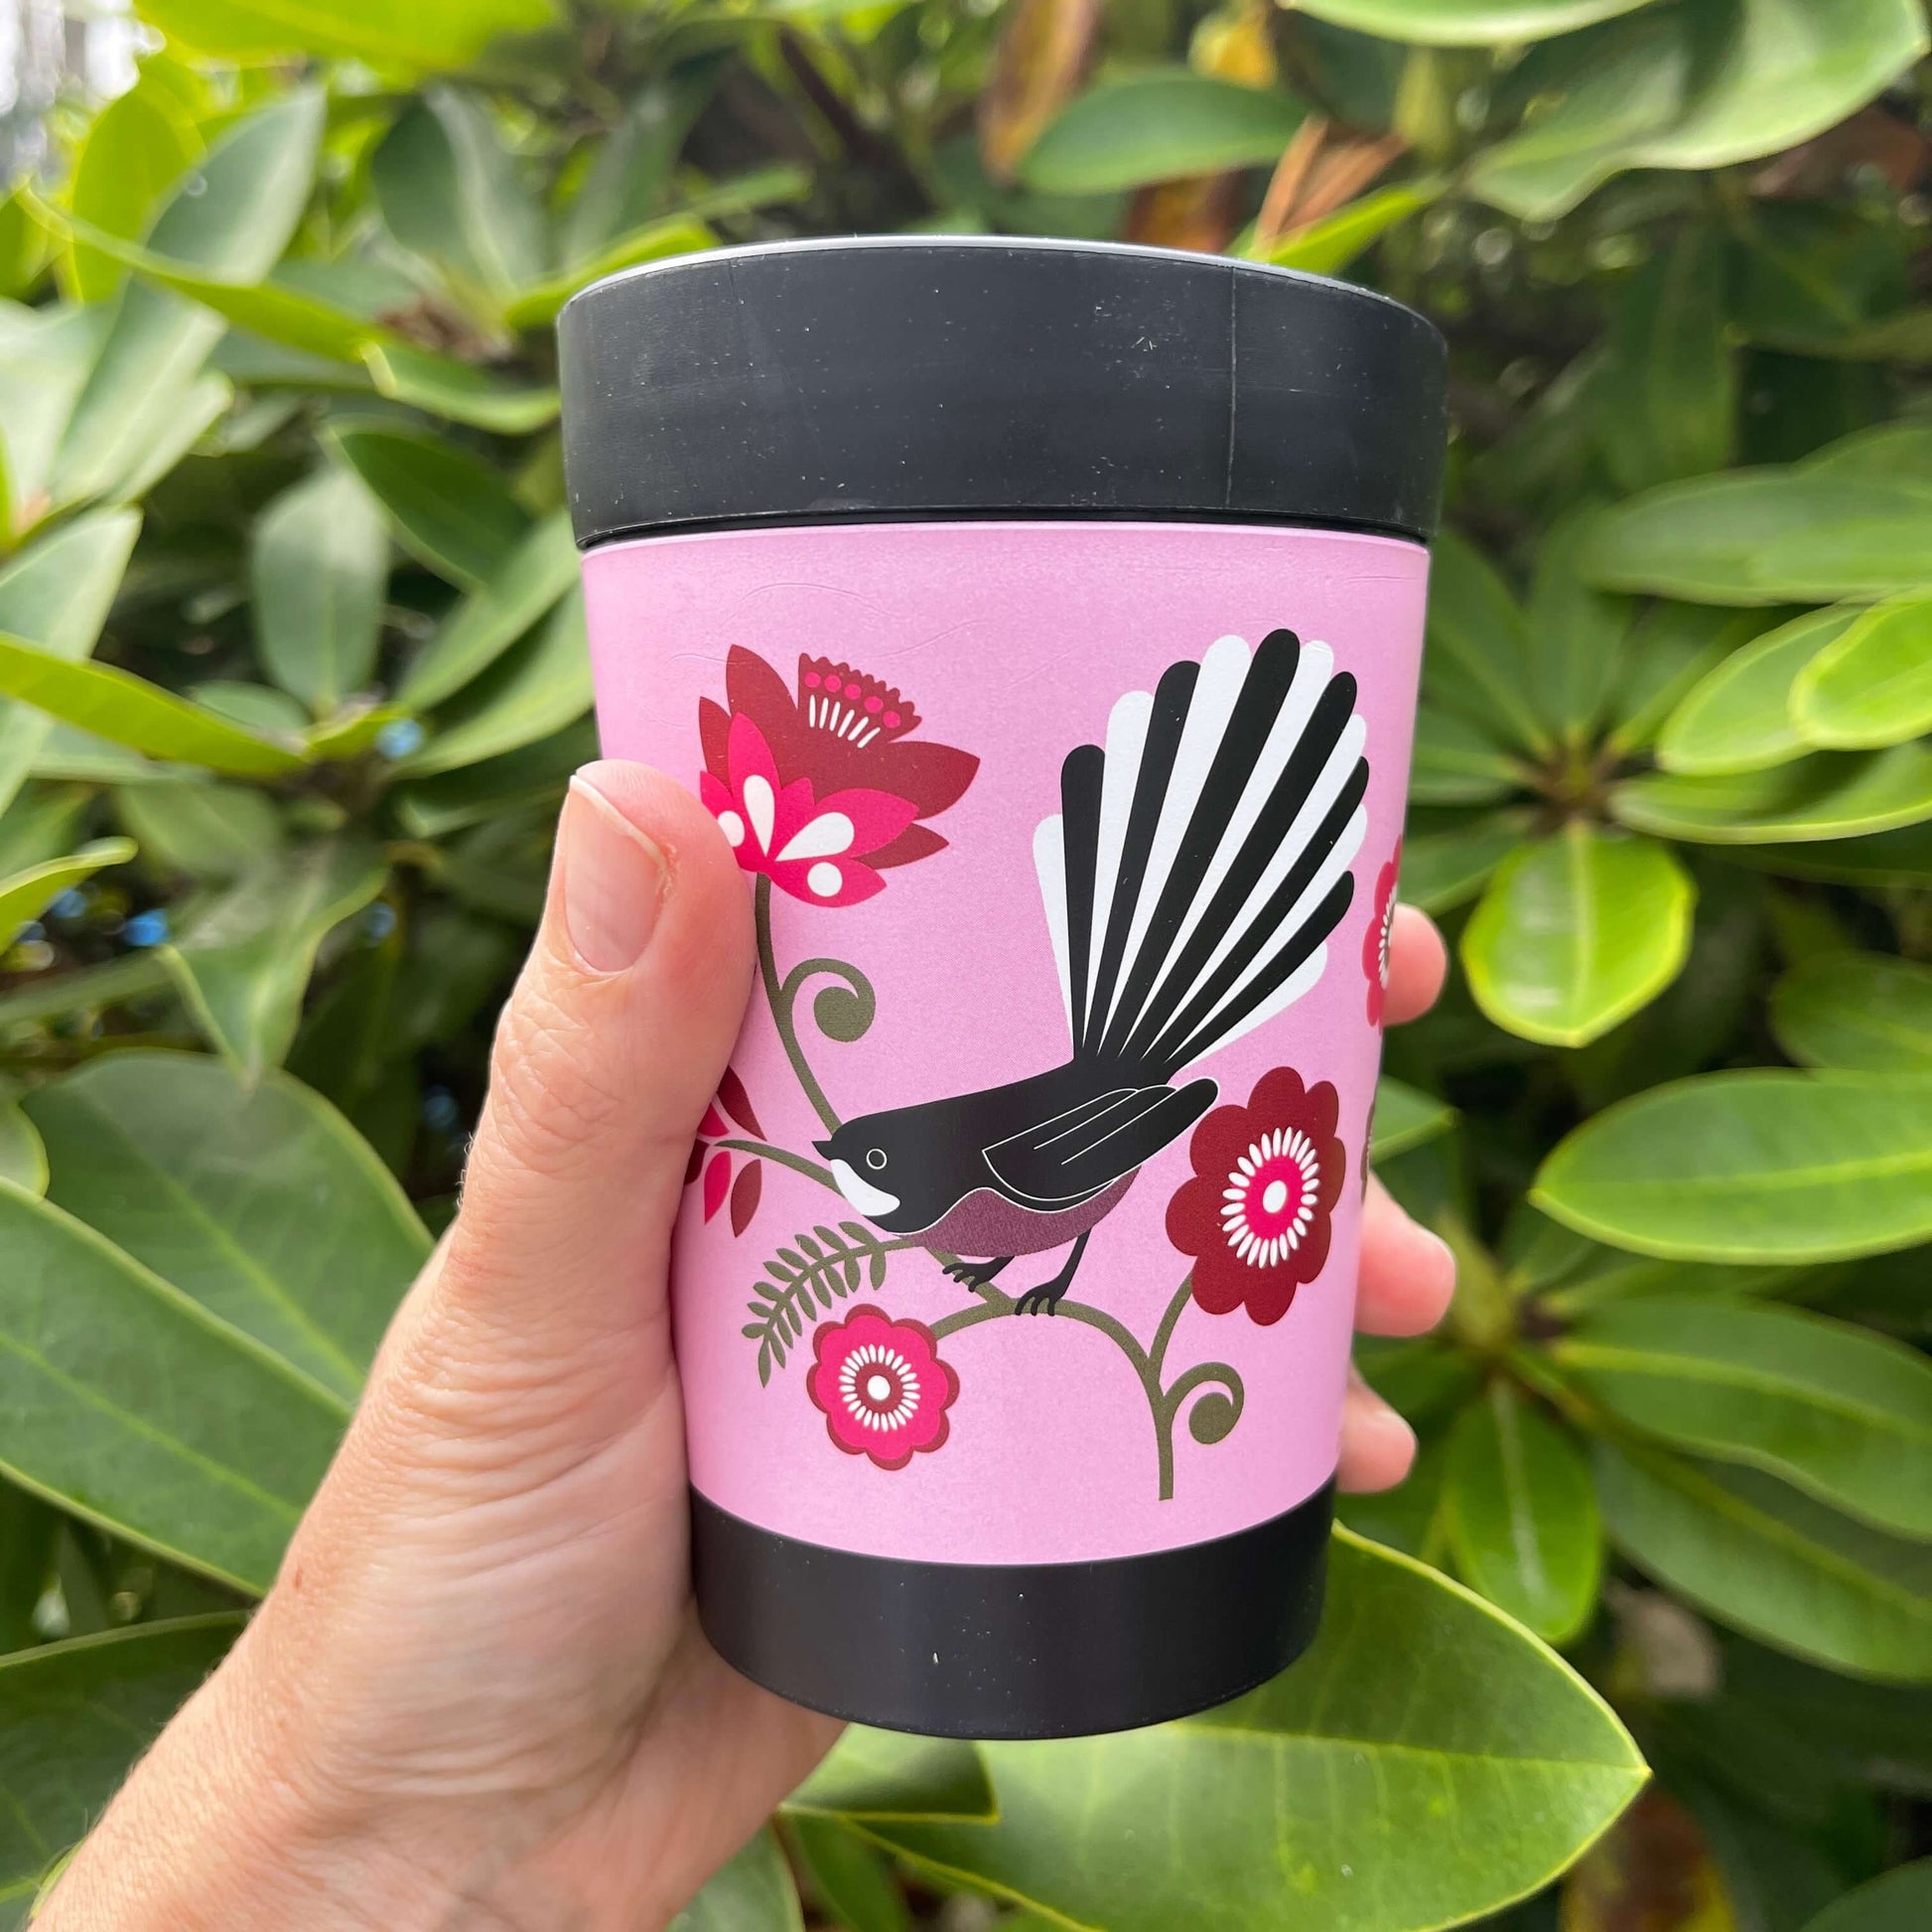 Black reusable coffee cup with bright pink wrap featuring a Fantail bird sitting on a green koru branch with pink flowers.